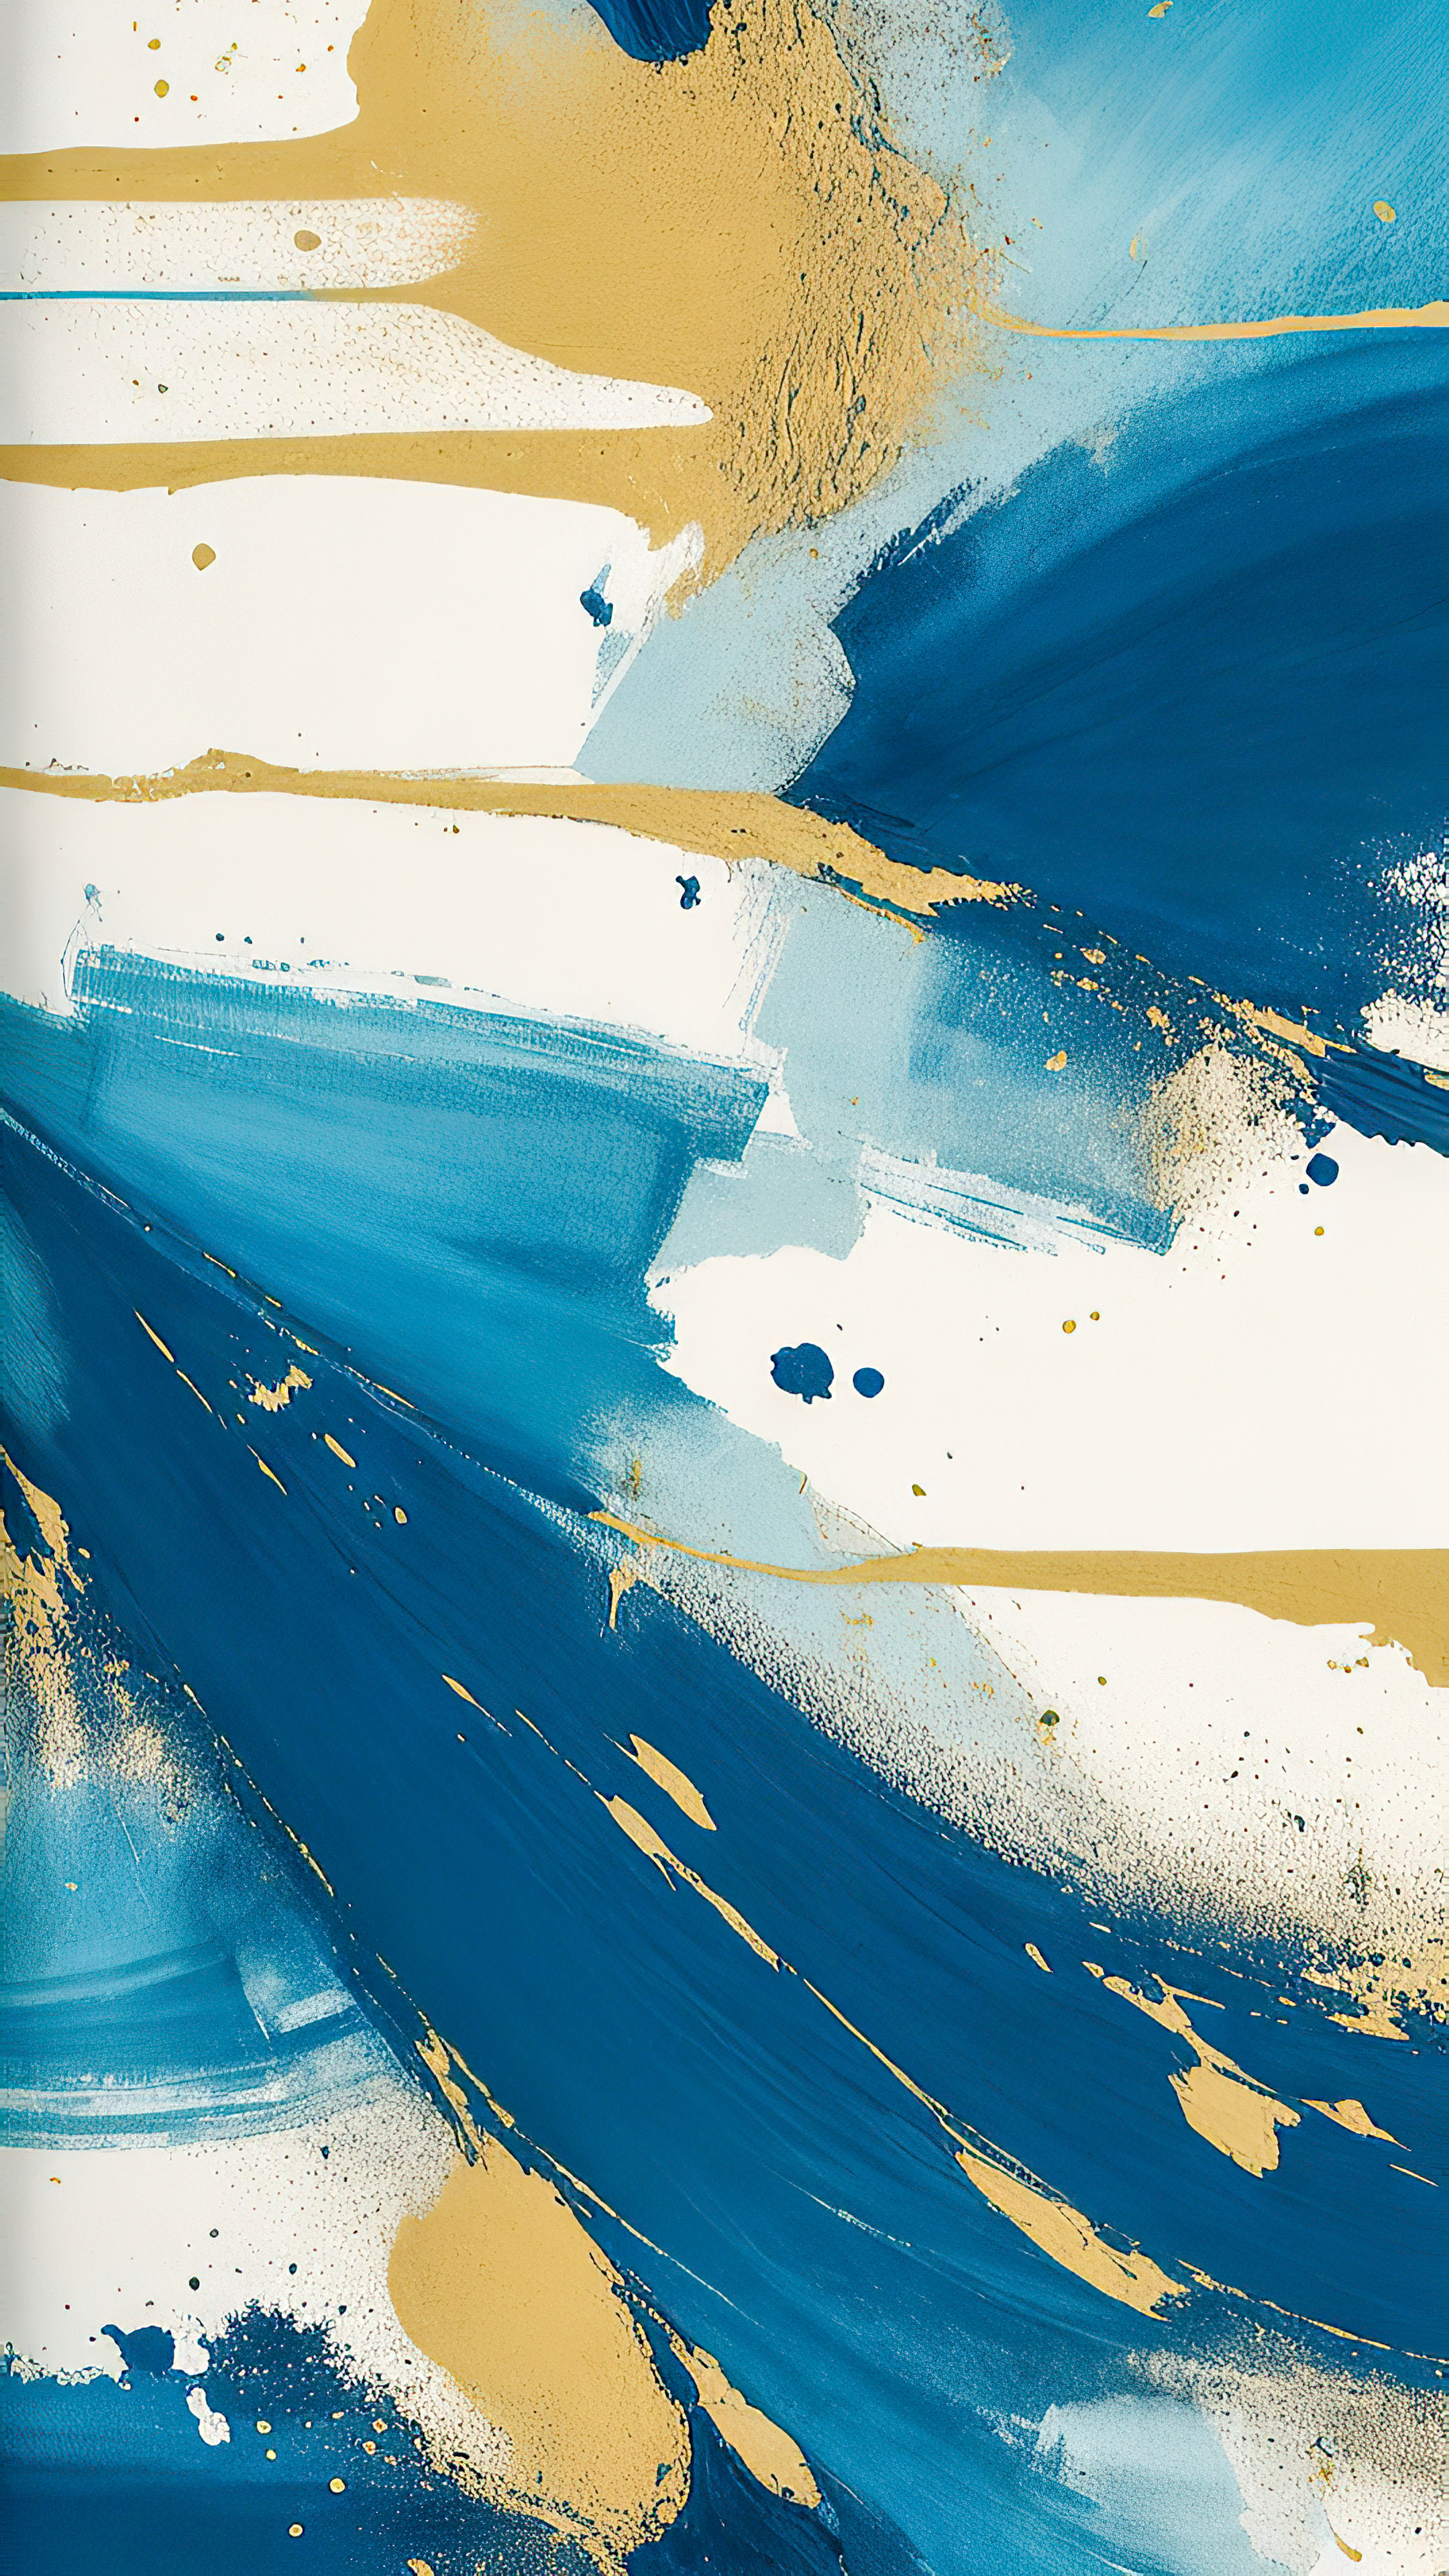 Elevate your iPhone experience with a 4K abstract wallpaper, capturing rough brushstrokes, smudges, and artistic splatters.